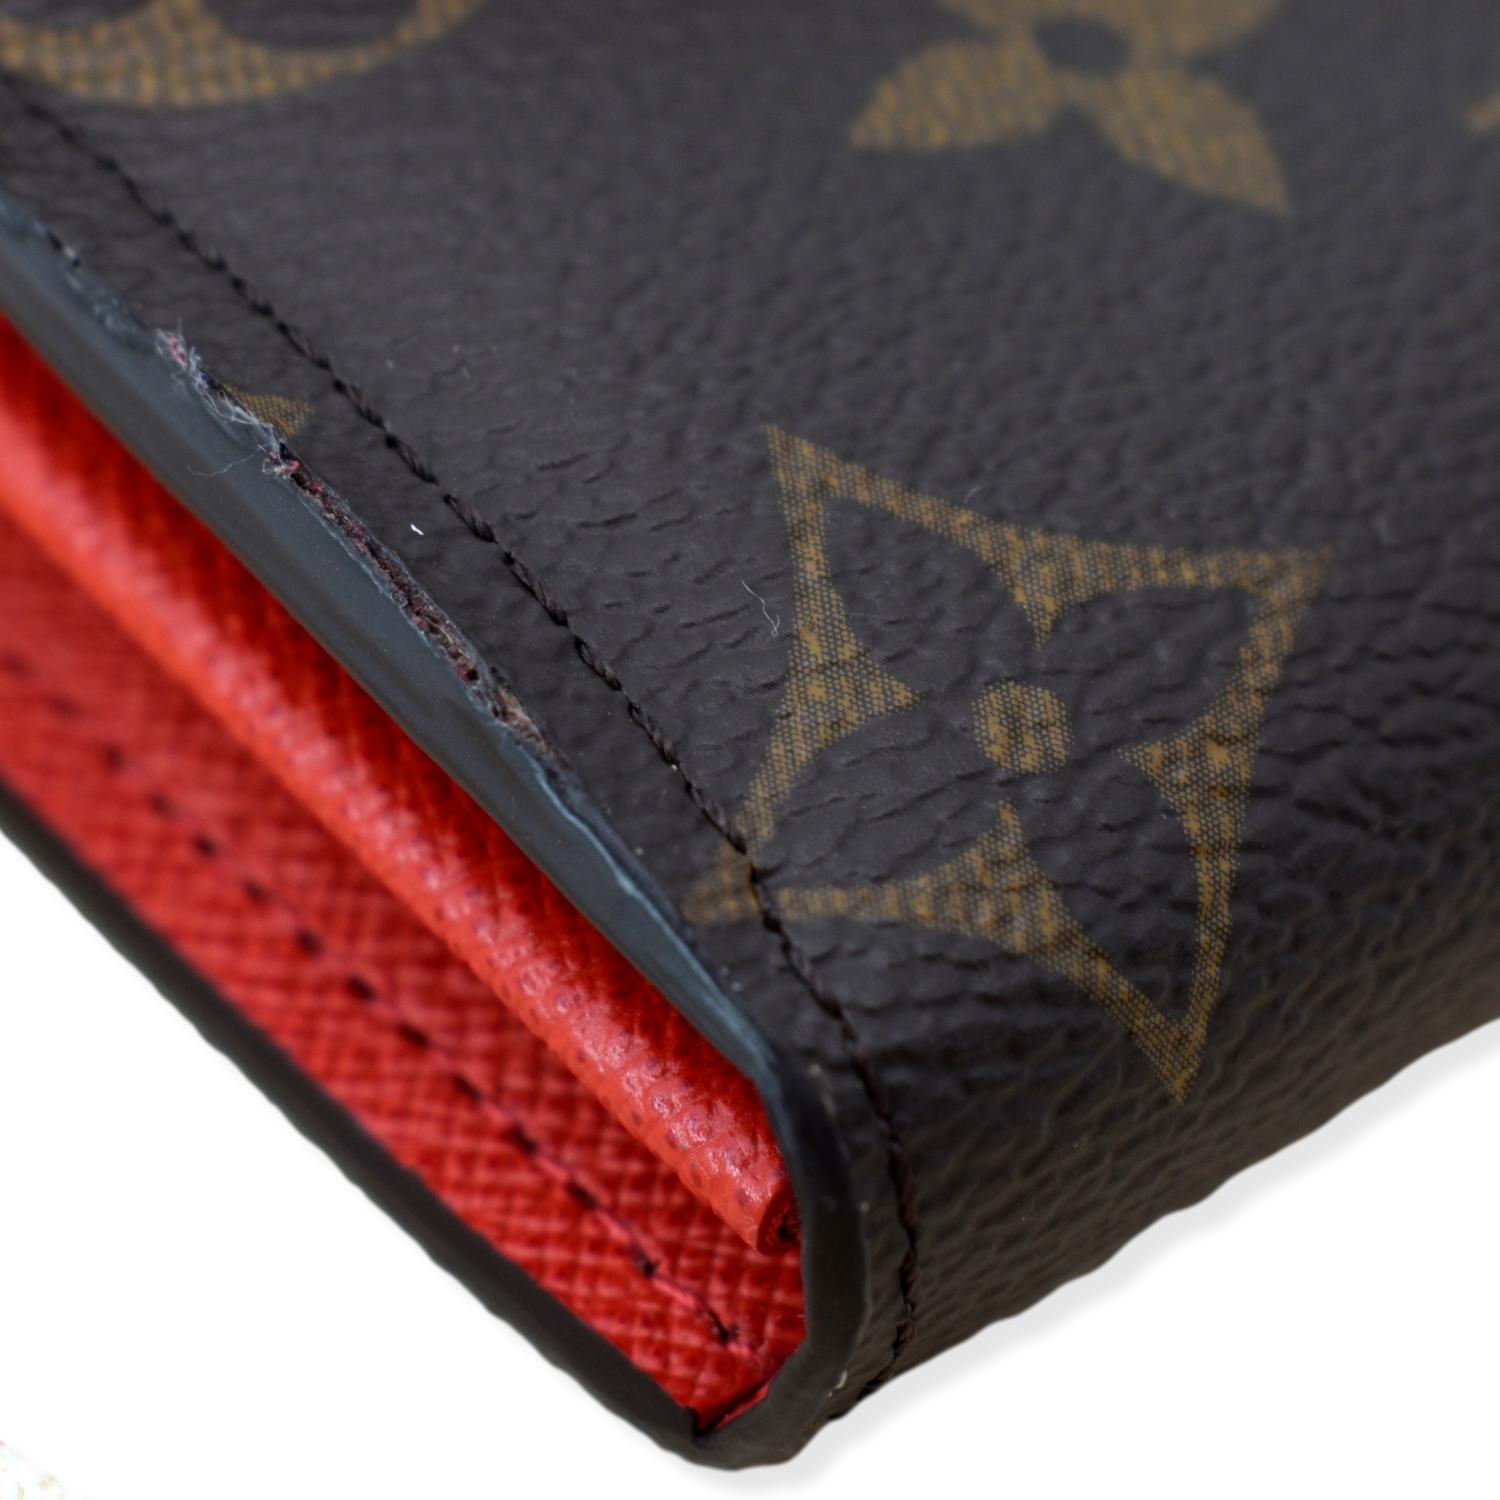 Louis Vuitton Sarah wallet with red interior. Gently